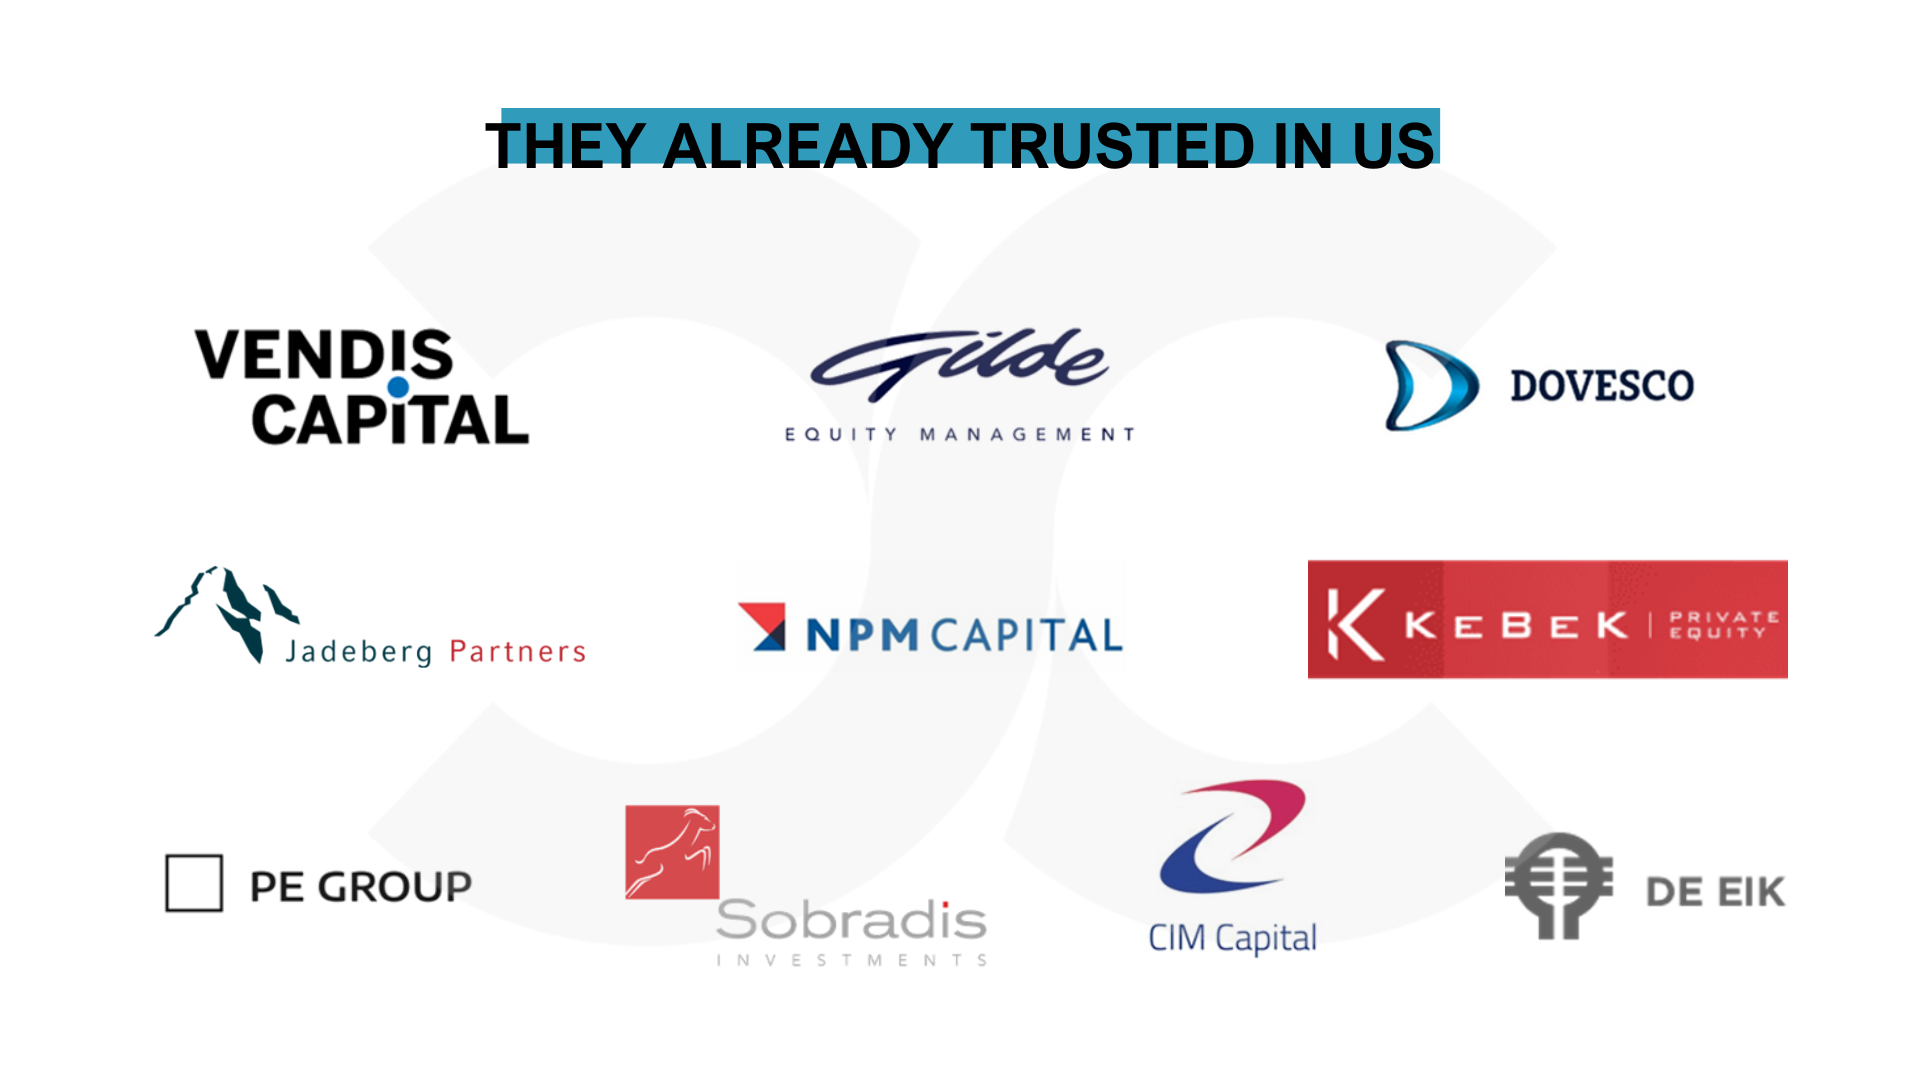 They already trusted in us: our private equity references